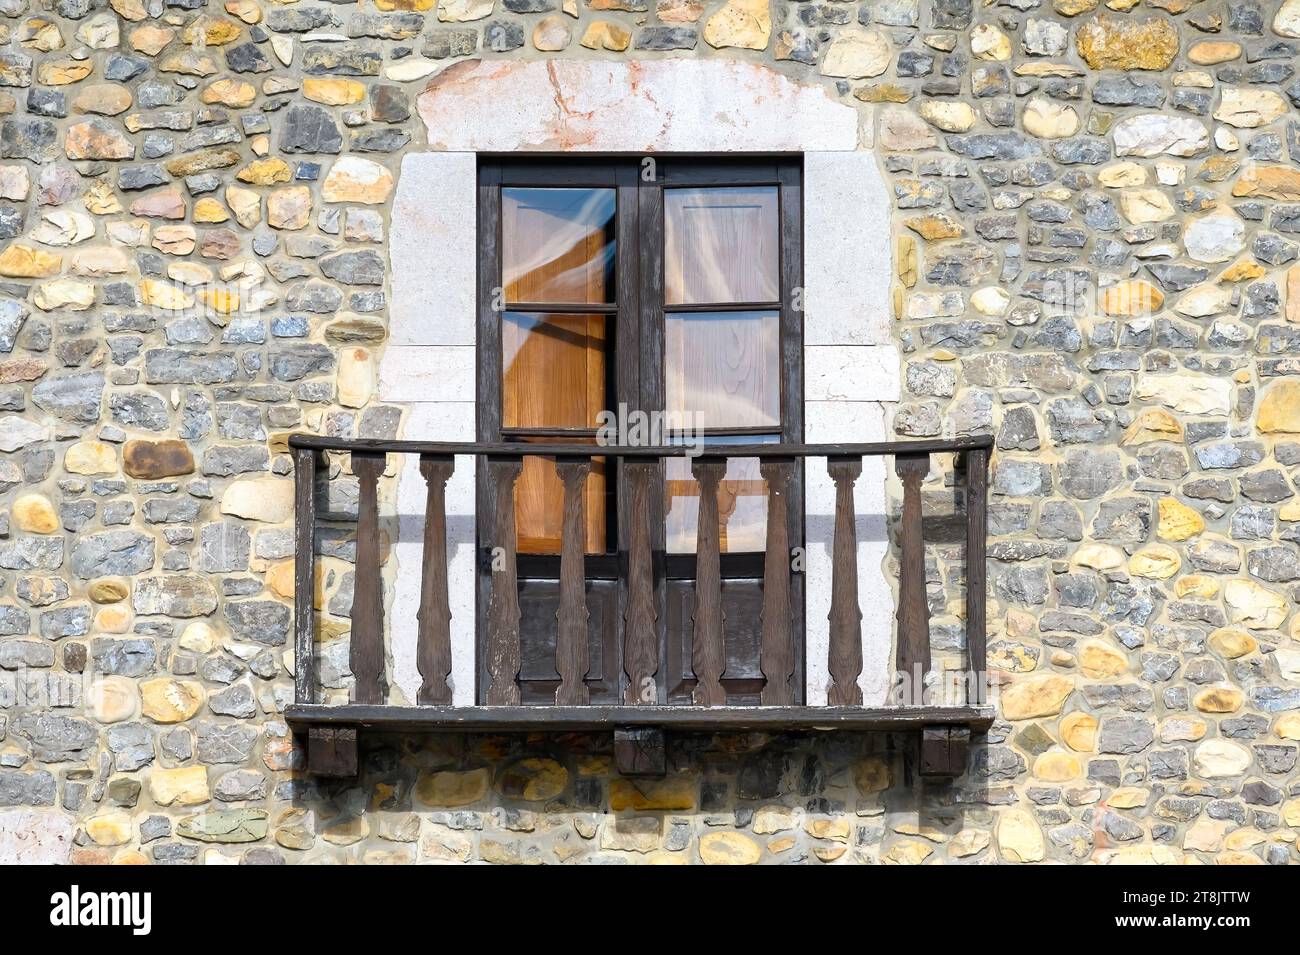 ASTURIAS, SPAIN, window with balcony in a stone wall building exterior Stock Photo